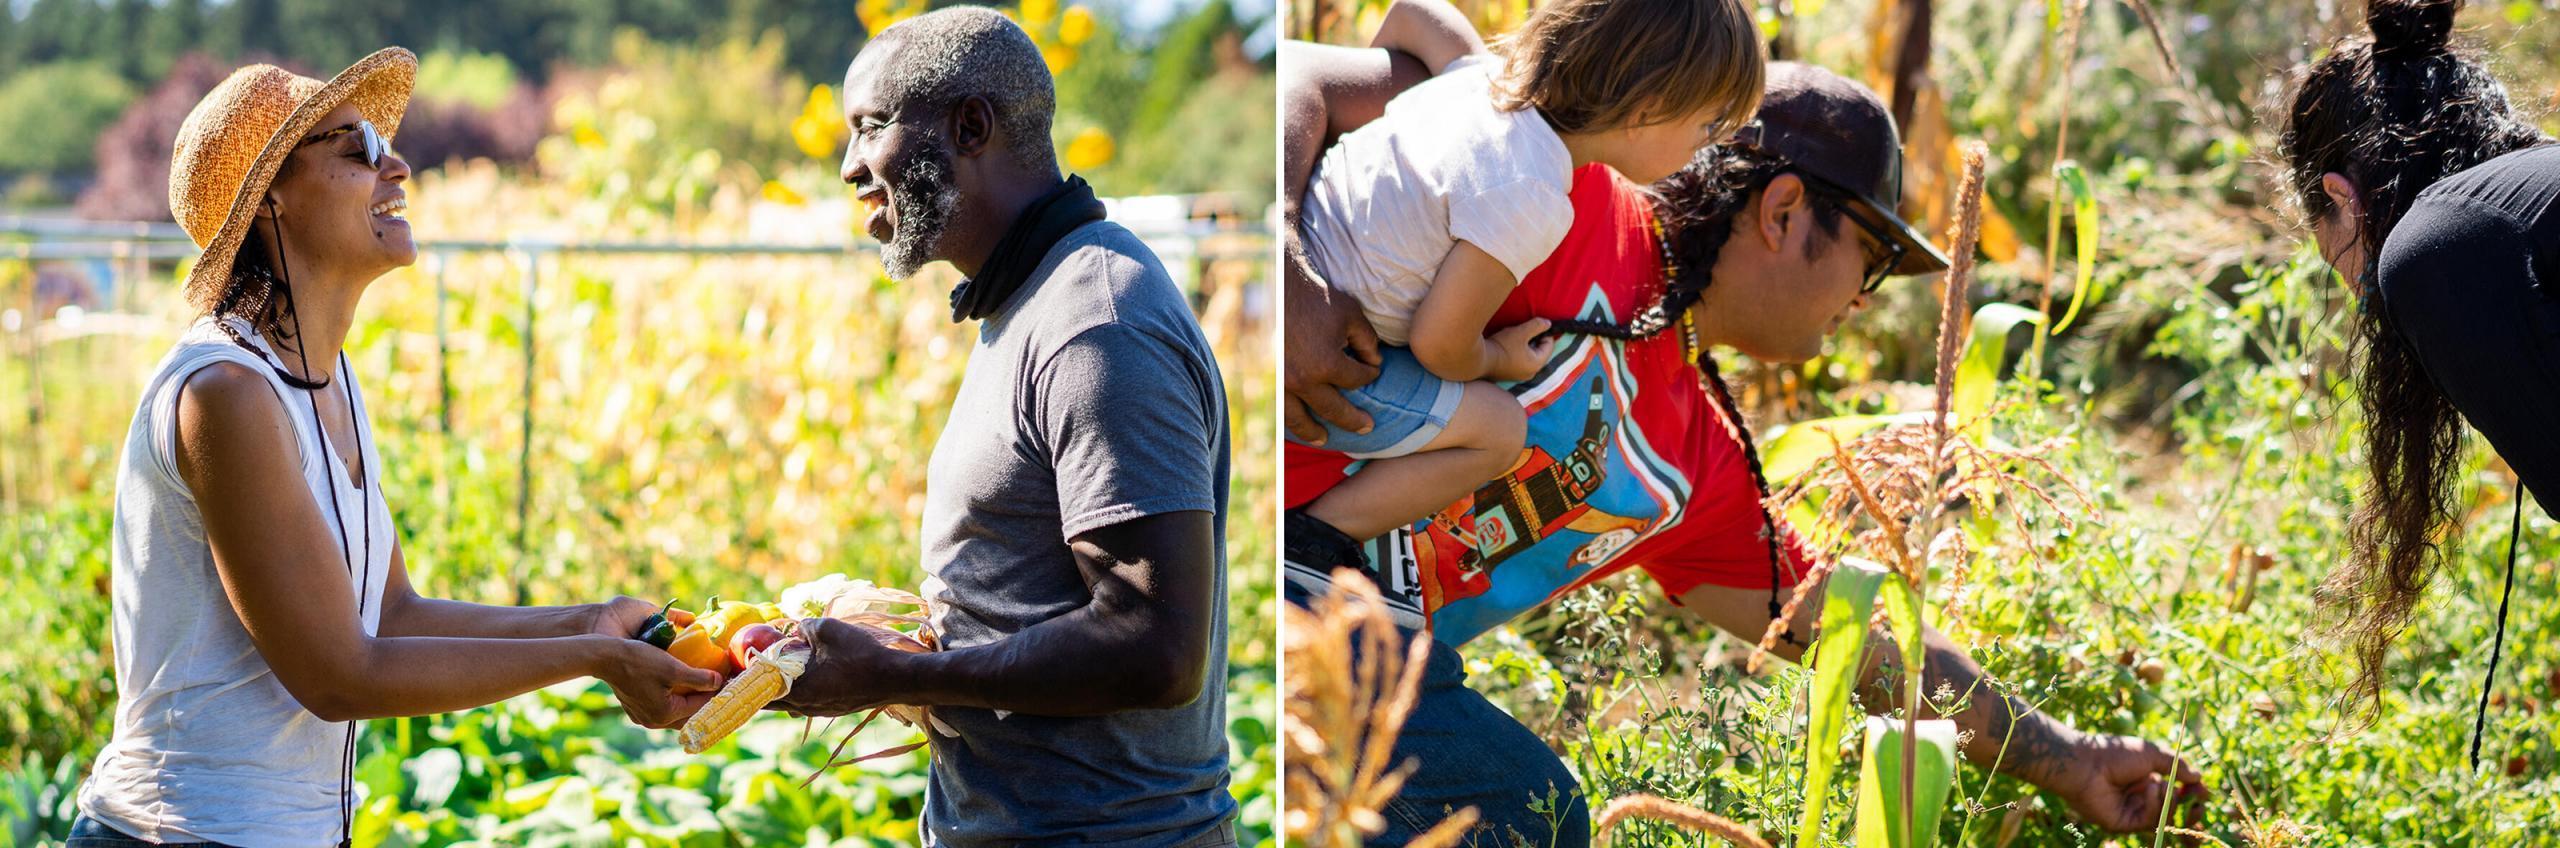 Two side-by-side photos. The left photo shows a woman and a man smiling joyously towards each other, holding vegetables between their extended hands. The right photo shows a man carrying a small child in one arm and picking plant matter with his other arm, while a woman leans in to see what he is picking.